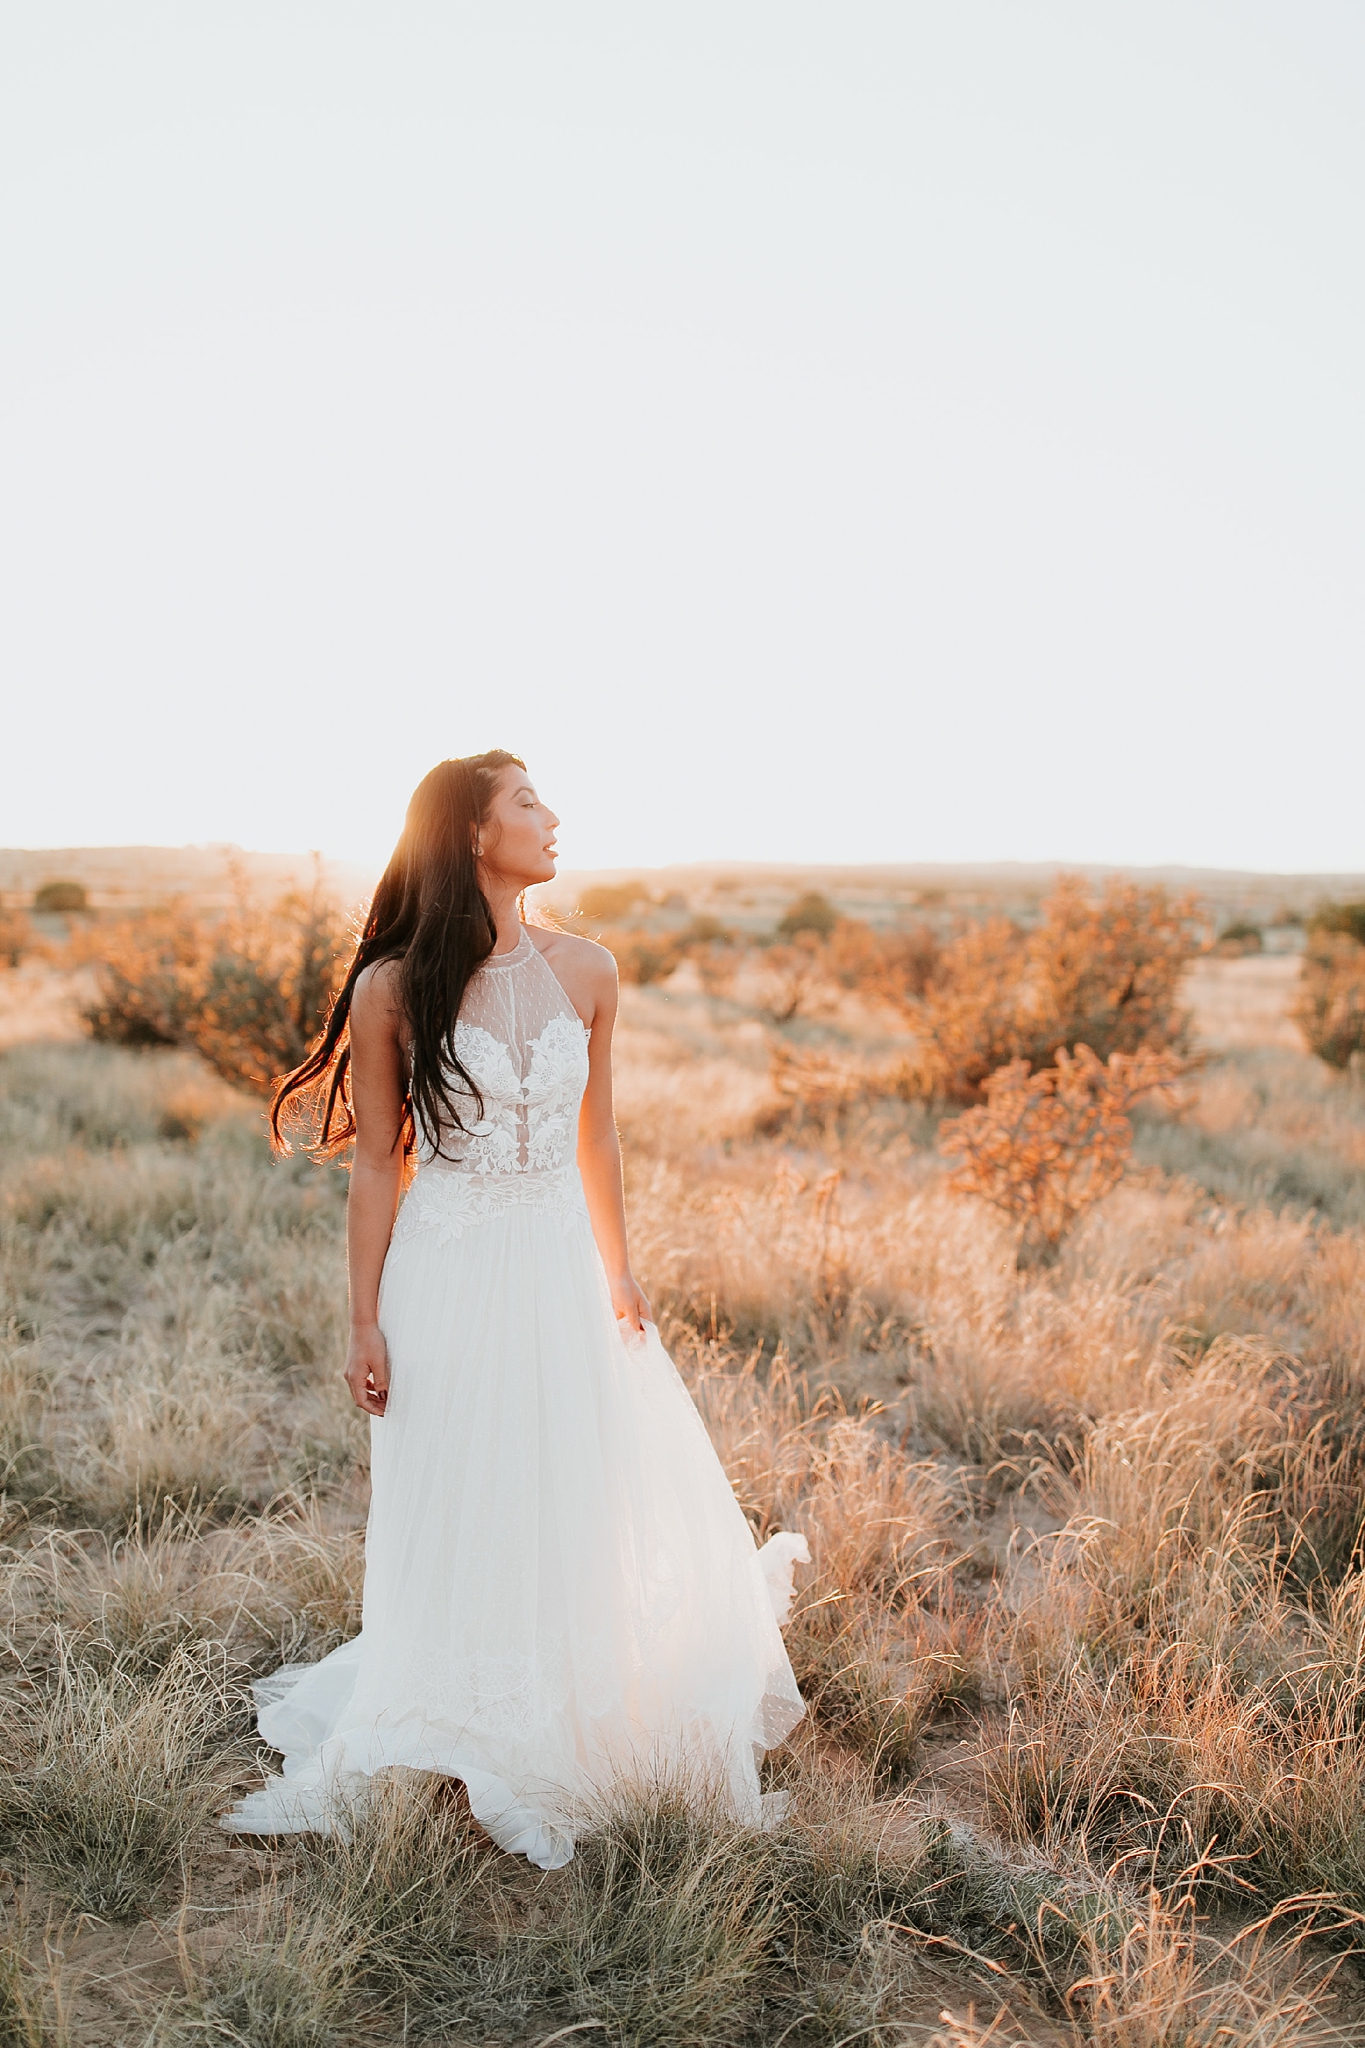 Alicia+lucia+photography+-+albuquerque+wedding+photographer+-+santa+fe+wedding+photography+-+new+mexico+wedding+photographer+-+new+mexico+wedding+-+wedding+gowns+-+bridal+gowns+-+a+line+wedding+gown_0054.jpg